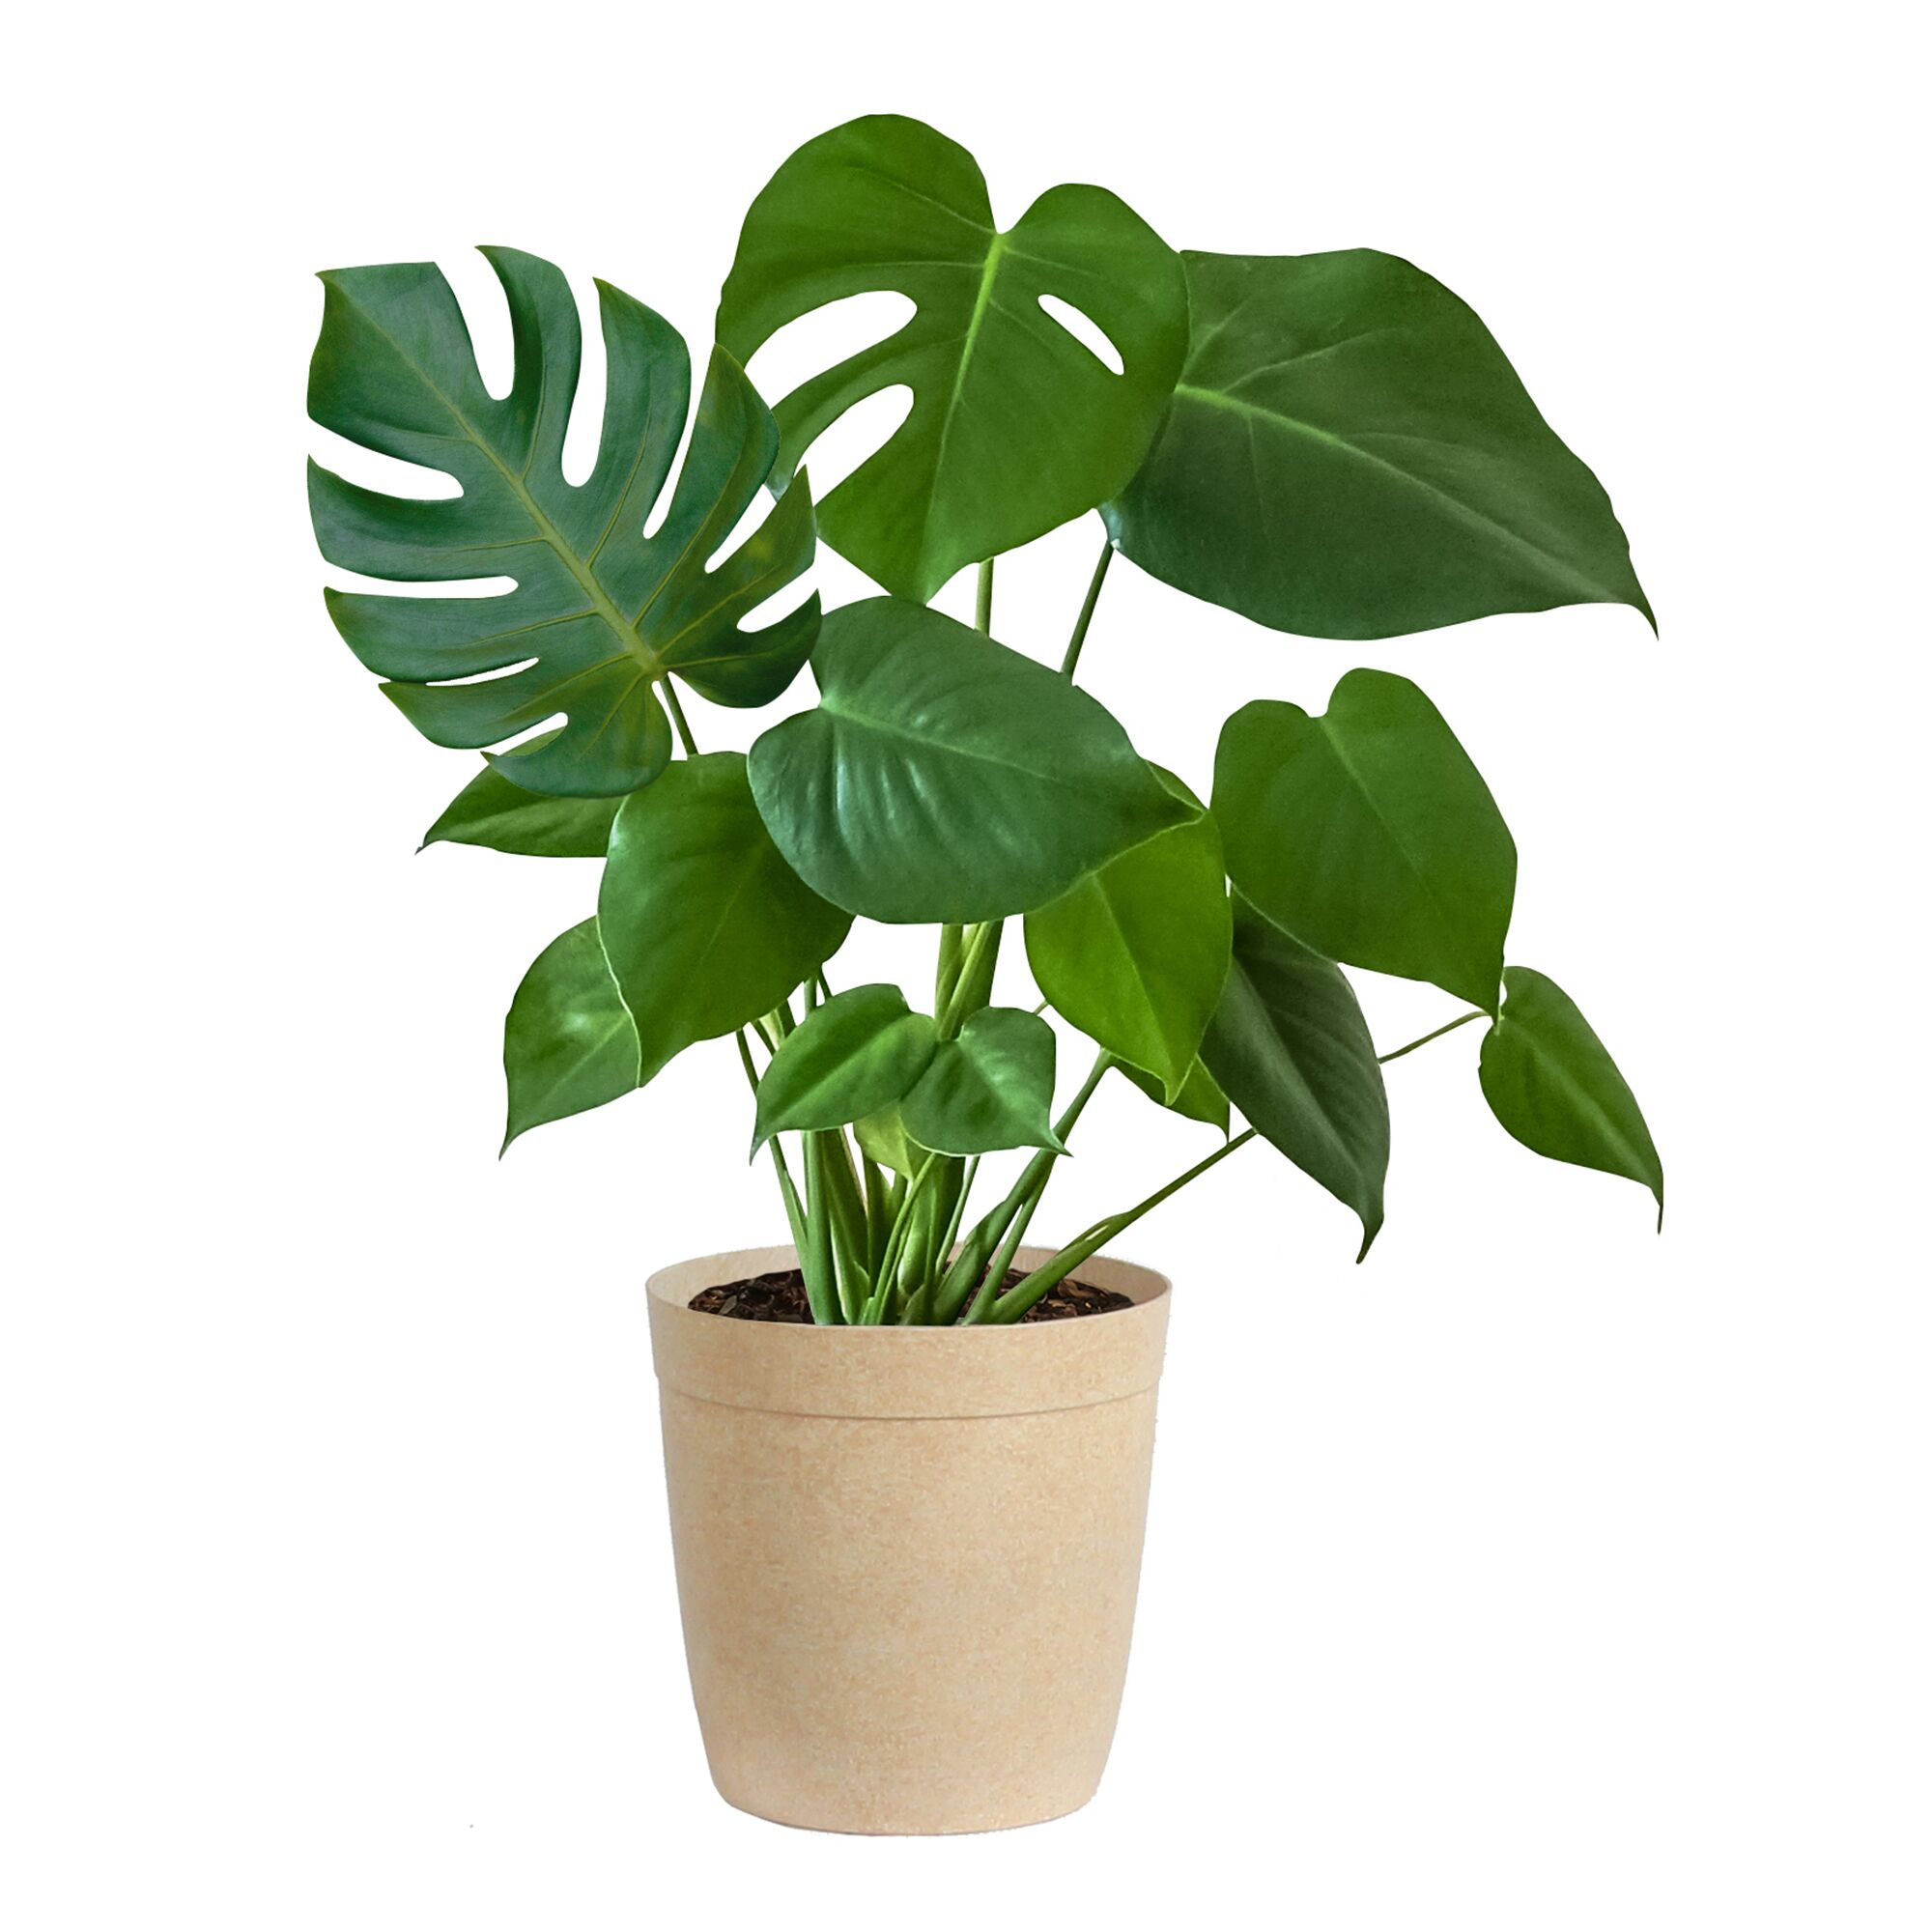 Monstera in a pot from FastGrowingTrees.com.